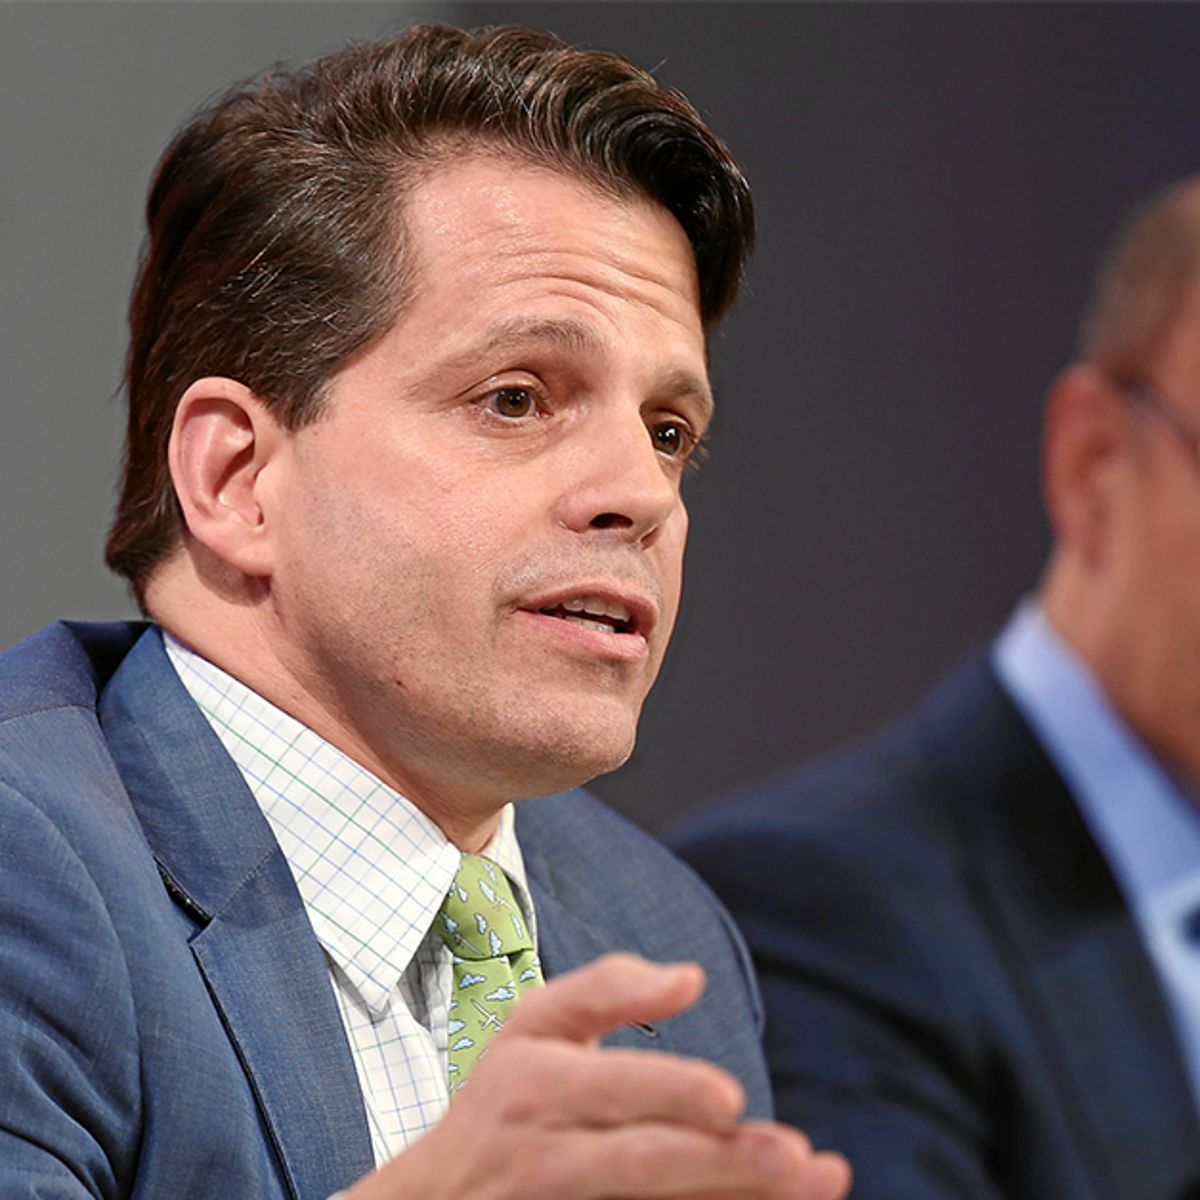 Scaramucci Posts Nude Photos of His Wife as Revenge for Divorce? Snopes